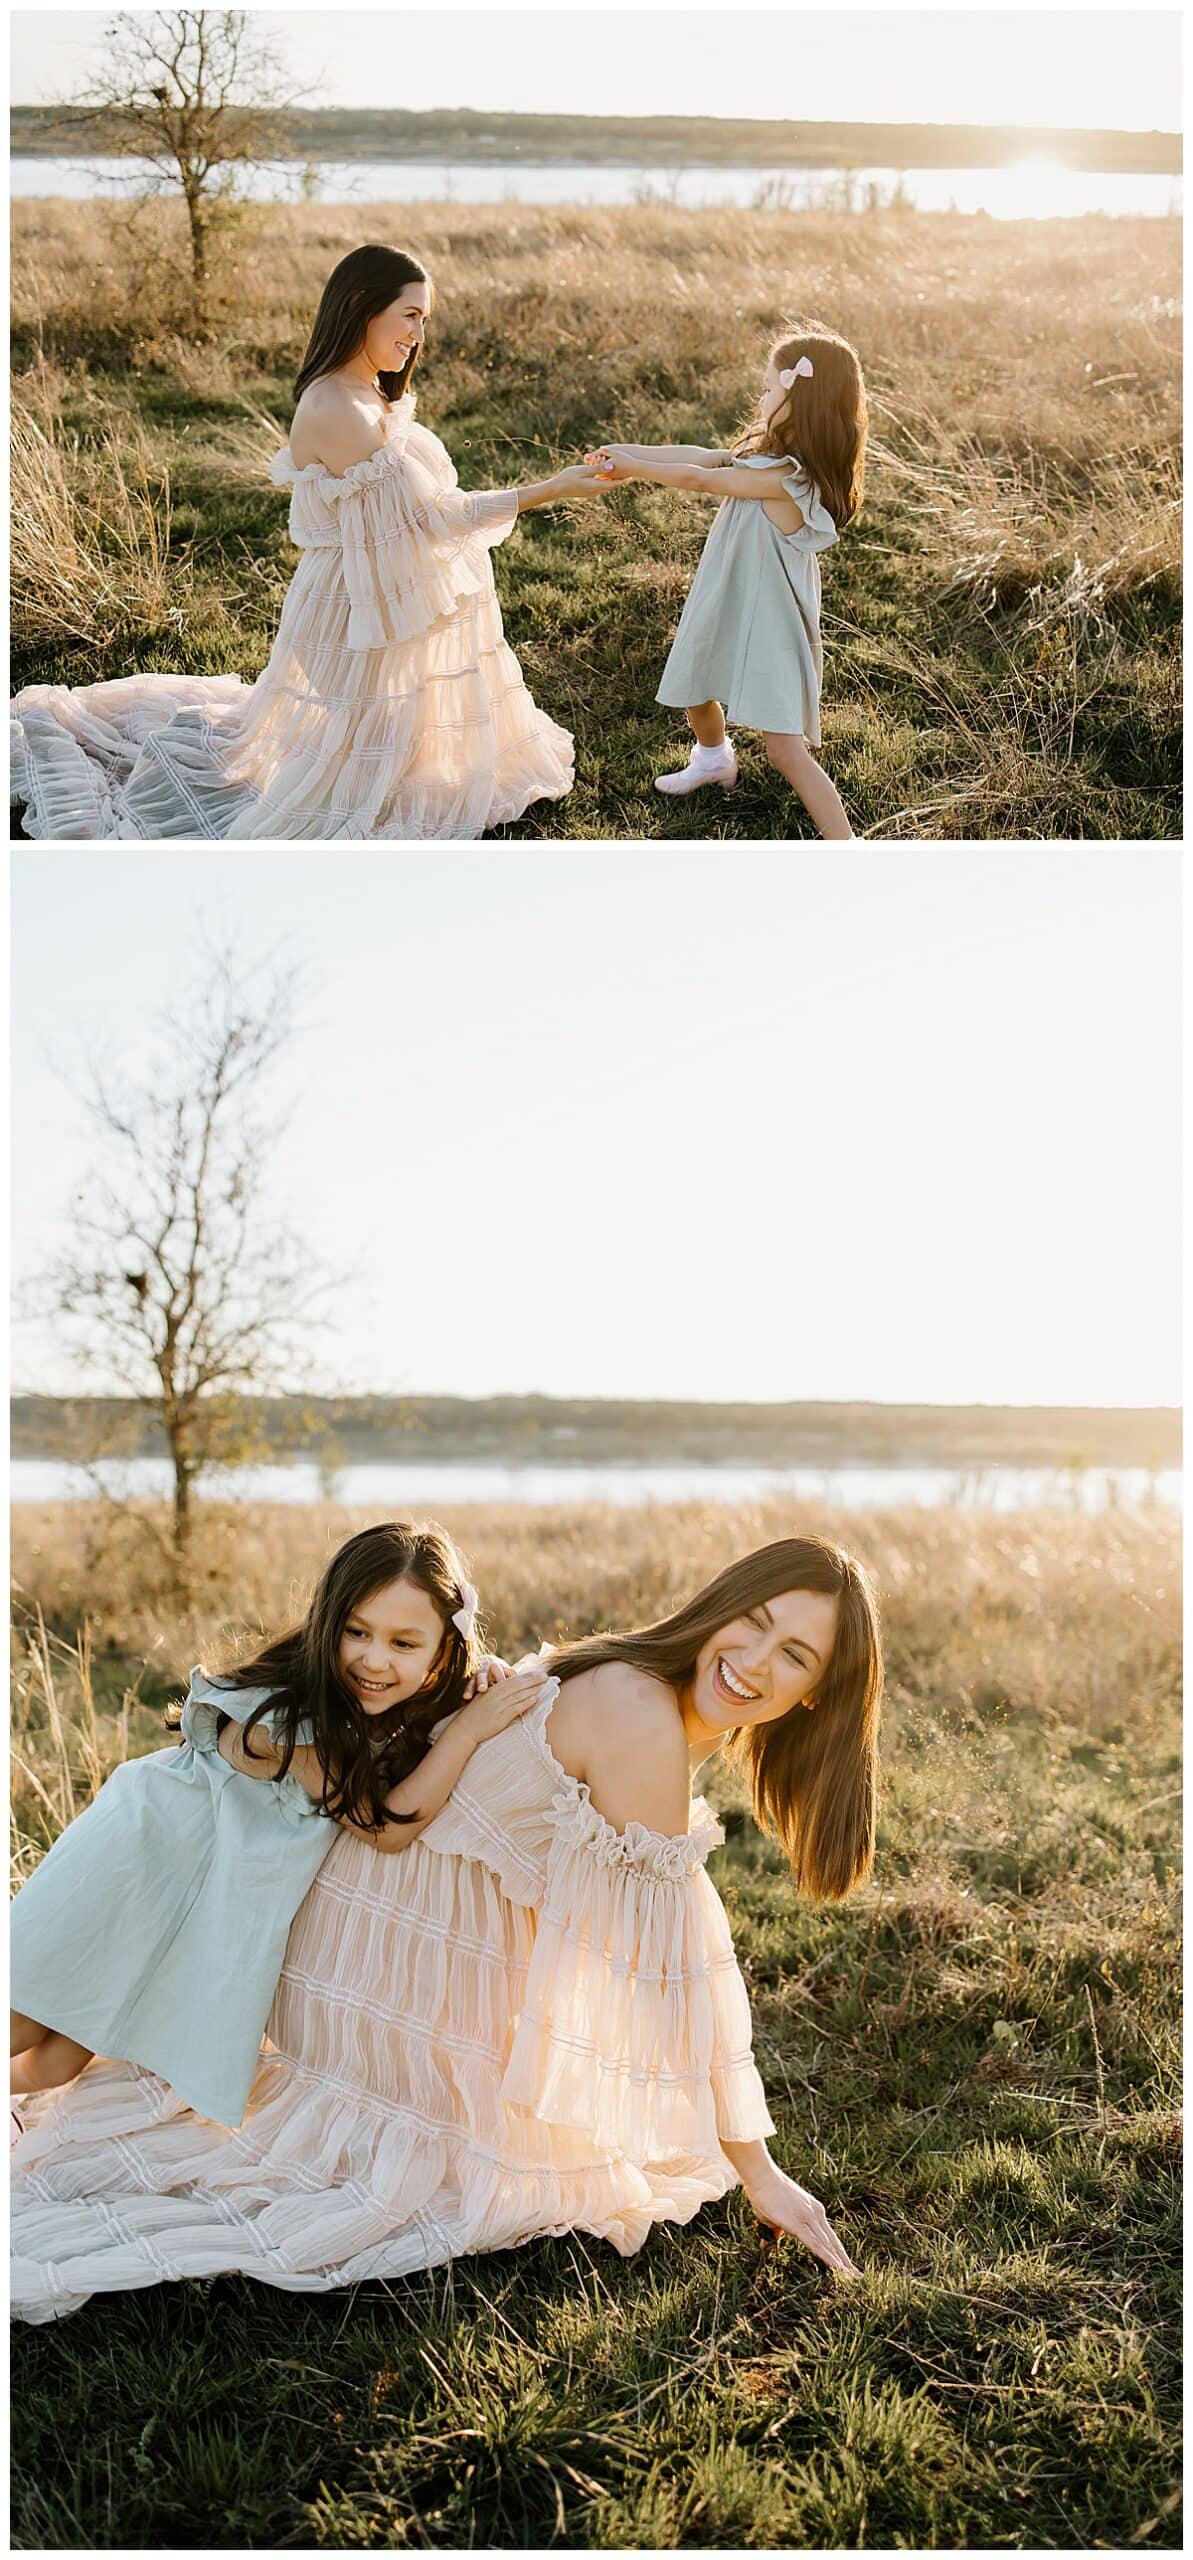 Mom and daughter play in the grass during their outdoor lifestyle photoshoot